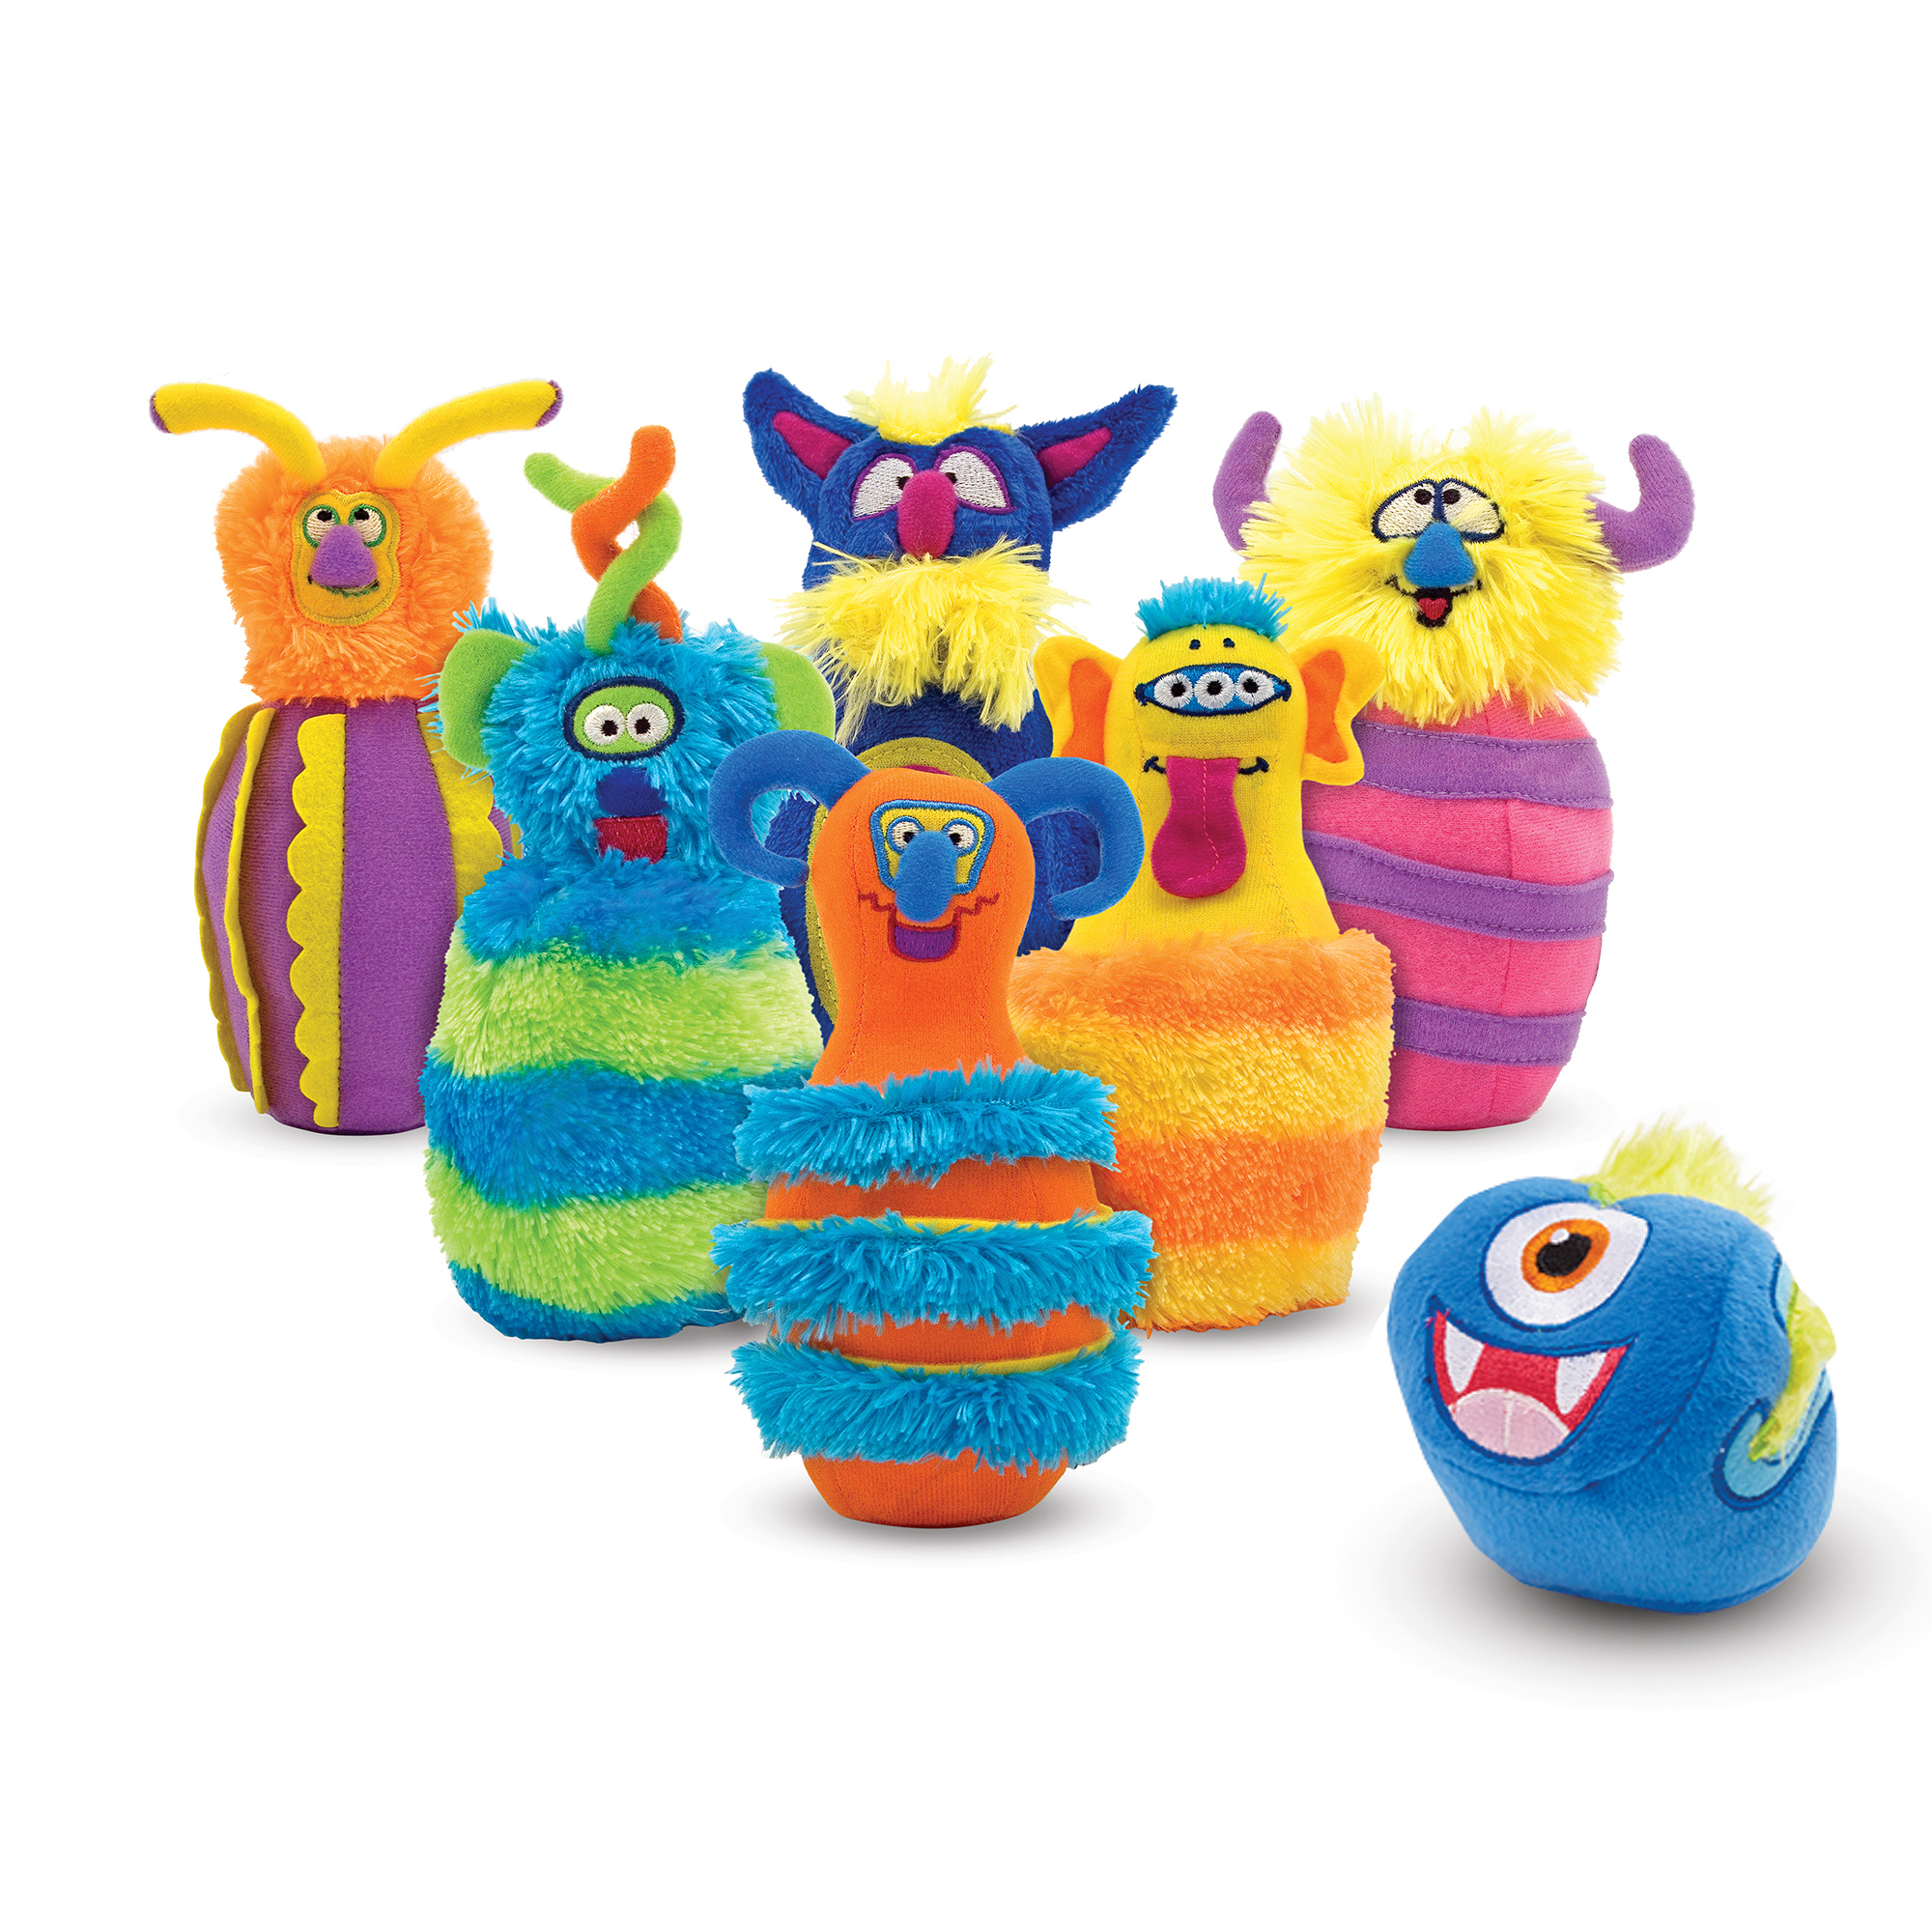 Melissa & Doug Fuzzy Monster Bowling Pins & Ball With Mesh Storage Bag (8-Piece Set) - image 1 of 9